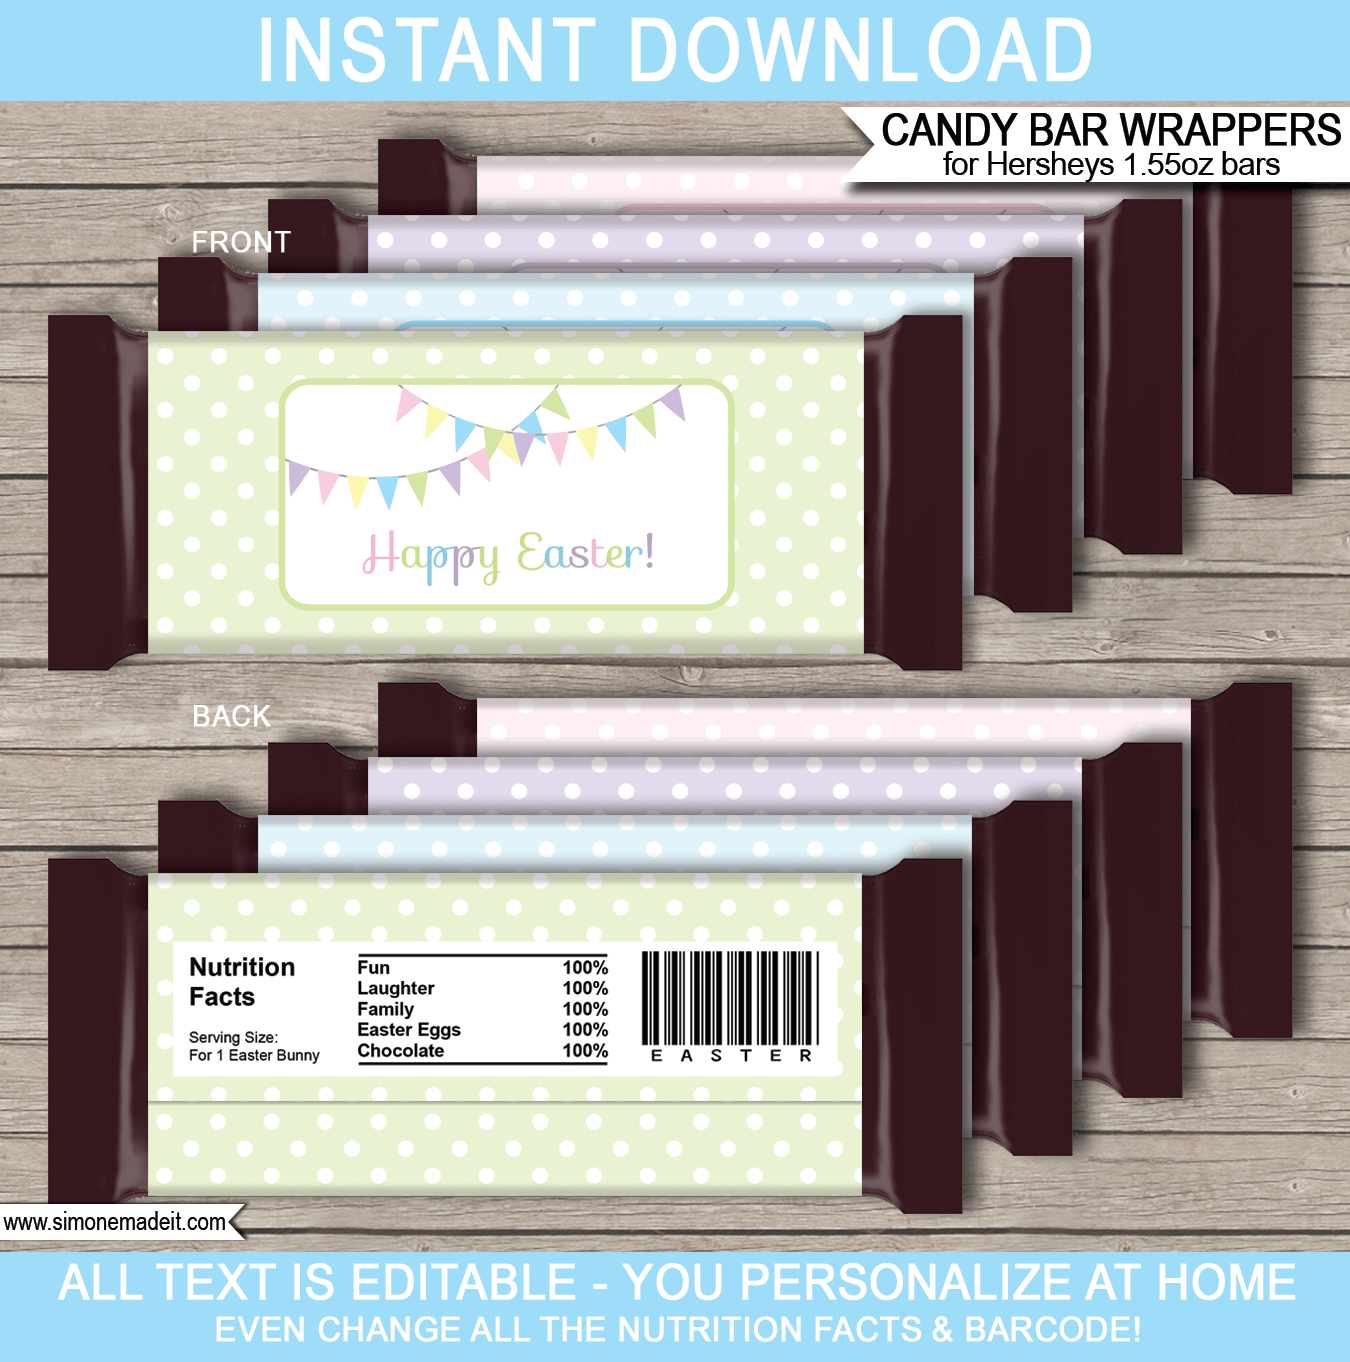 Easter Hershey Candy Bar Wrappers | Birthday Party Favors | Personalized Candy Bars | Editable Template | INSTANT DOWNLOAD $3.00 via simonemadeit.com